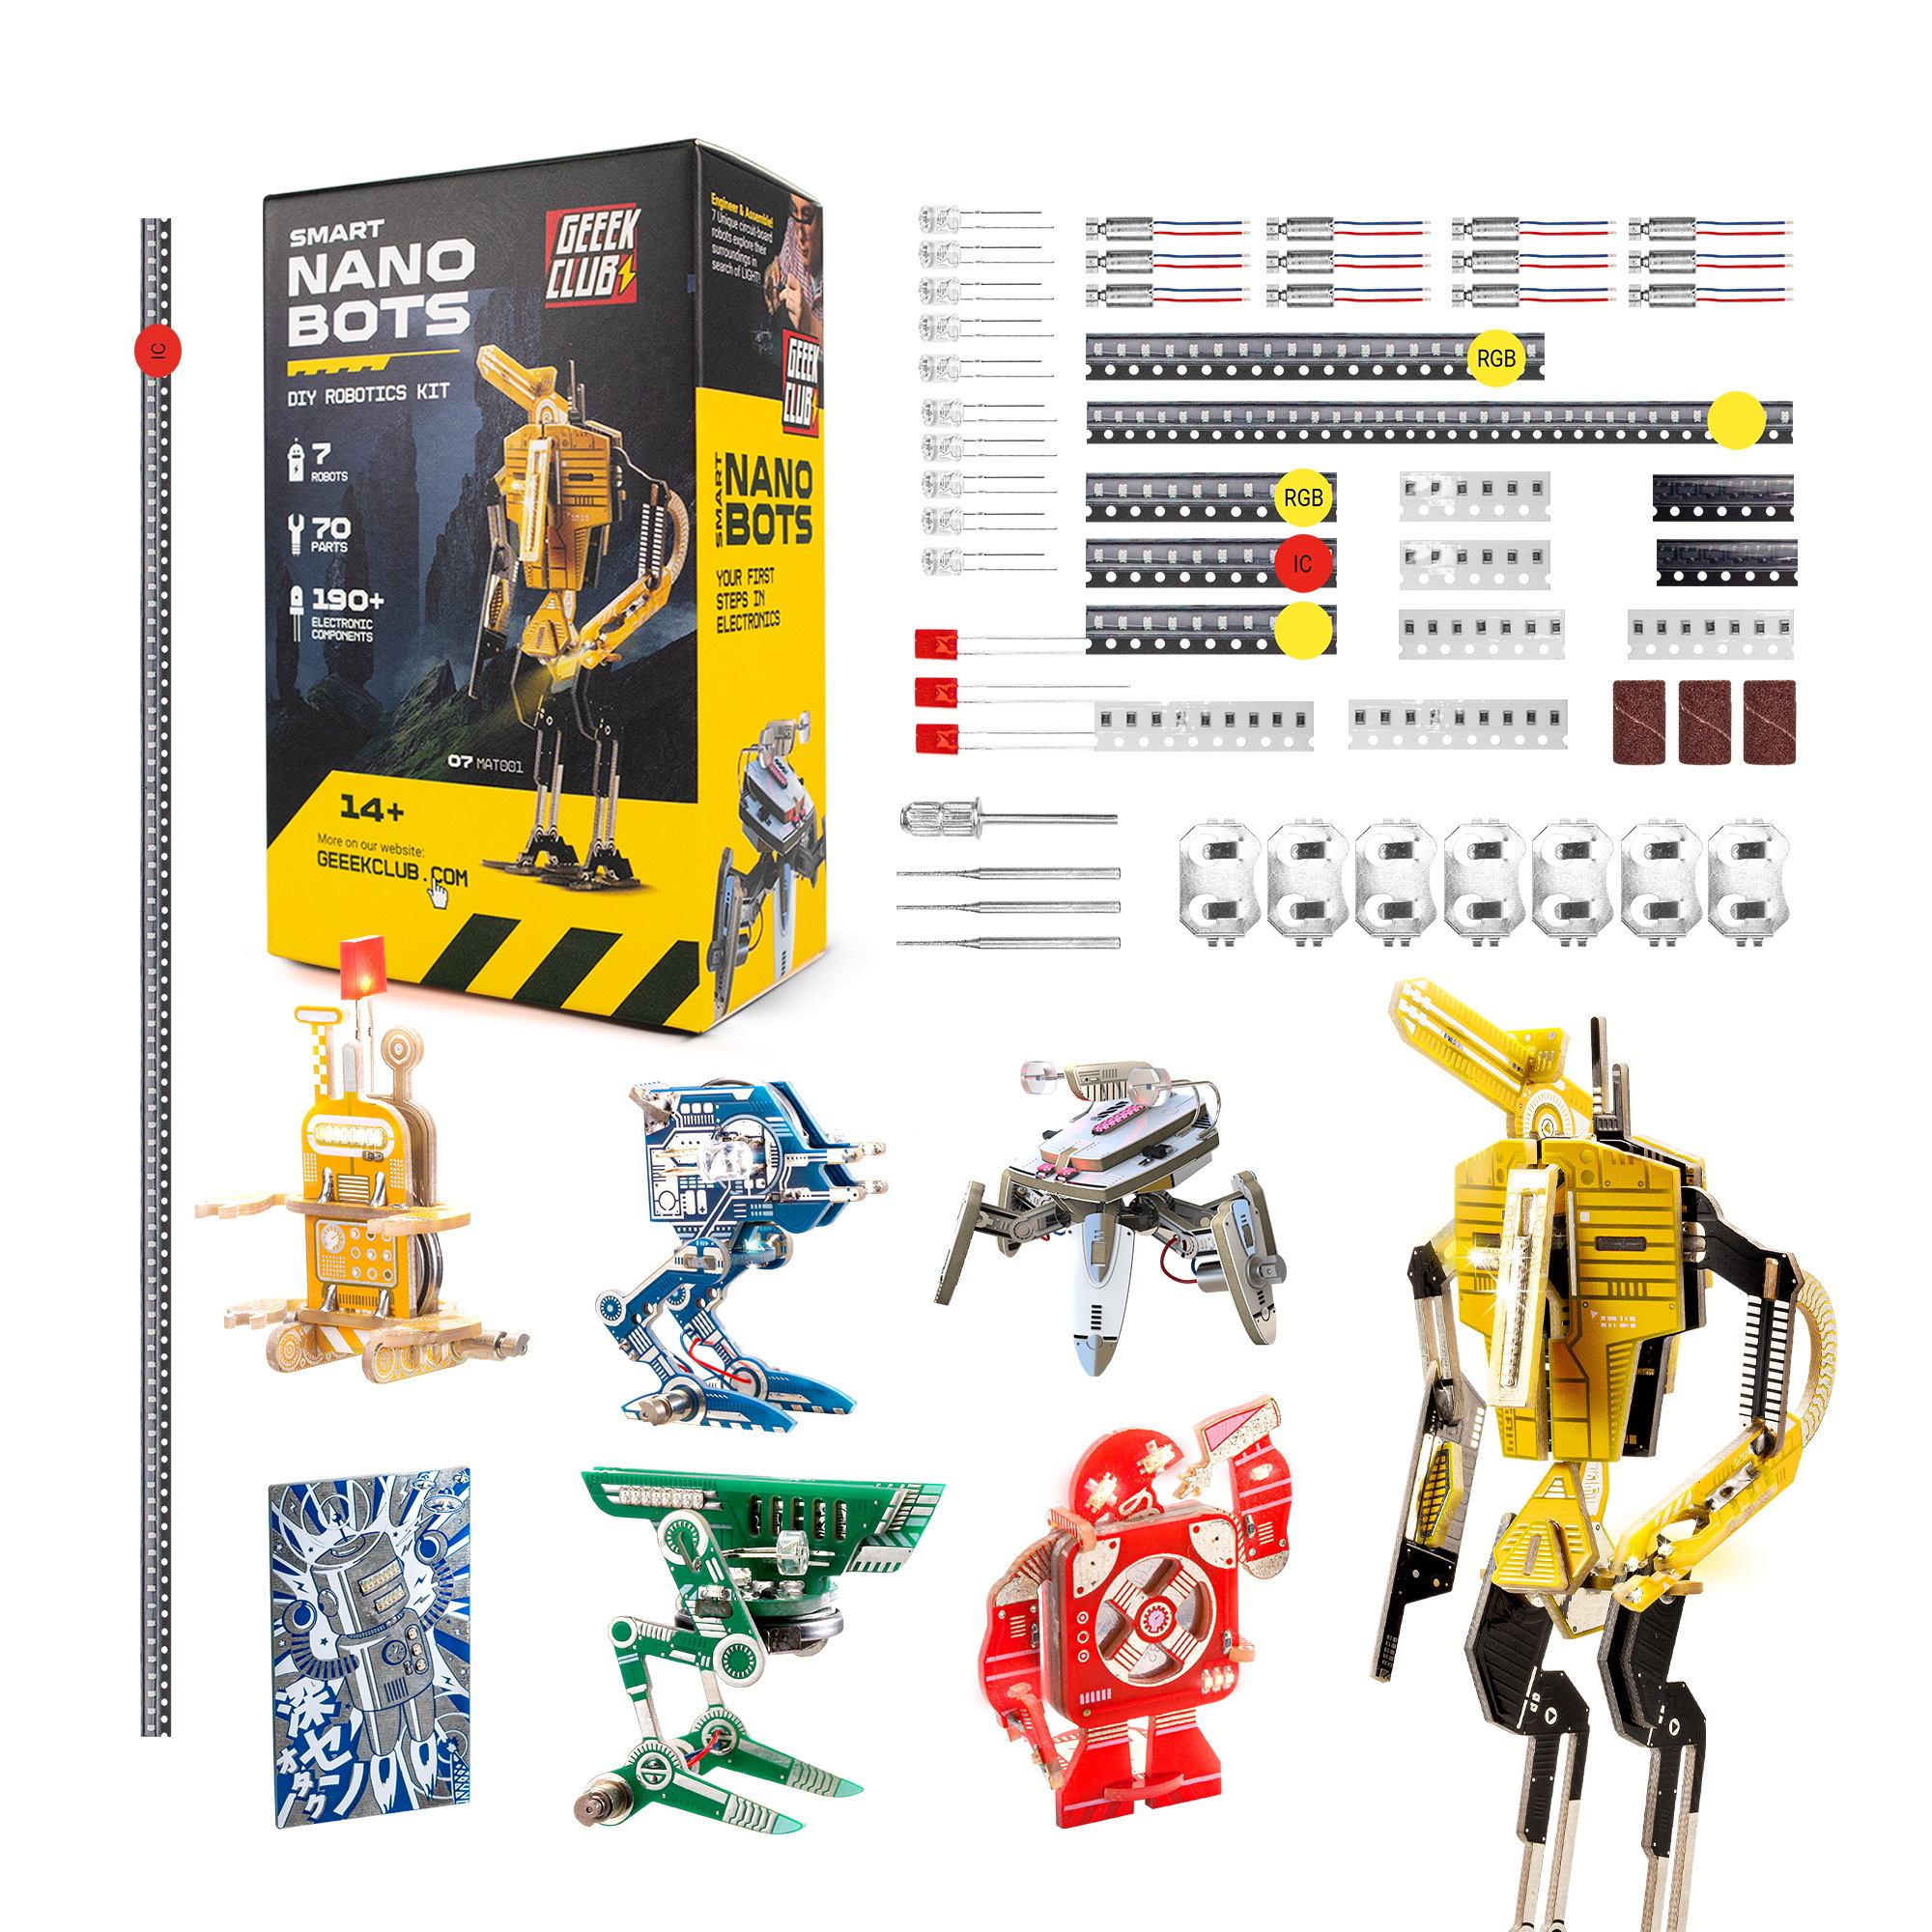  Geeek Club Robot Building Kit for Kids and Adults - Smart Nano  Bots STEM Robotics Kits with Tools - Educational DIY Build Your Own Robot  Set - Circuit Board Engineering Robotic